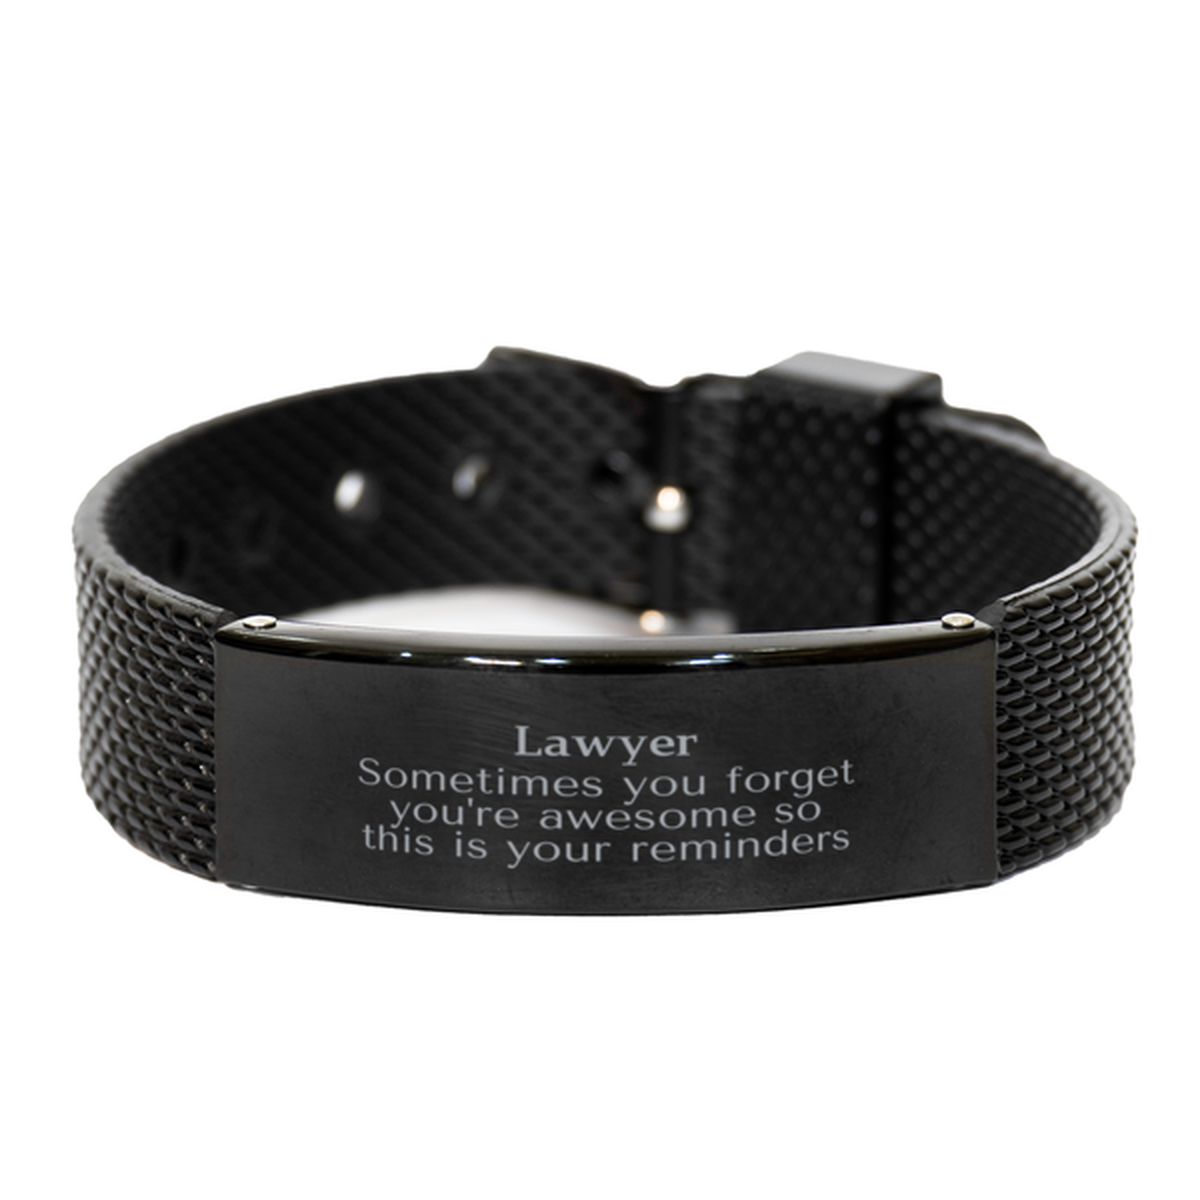 Sentimental Lawyer Black Shark Mesh Bracelet, Lawyer Sometimes you forget you're awesome so this is your reminders, Graduation Christmas Birthday Gifts for Lawyer, Men, Women, Coworkers